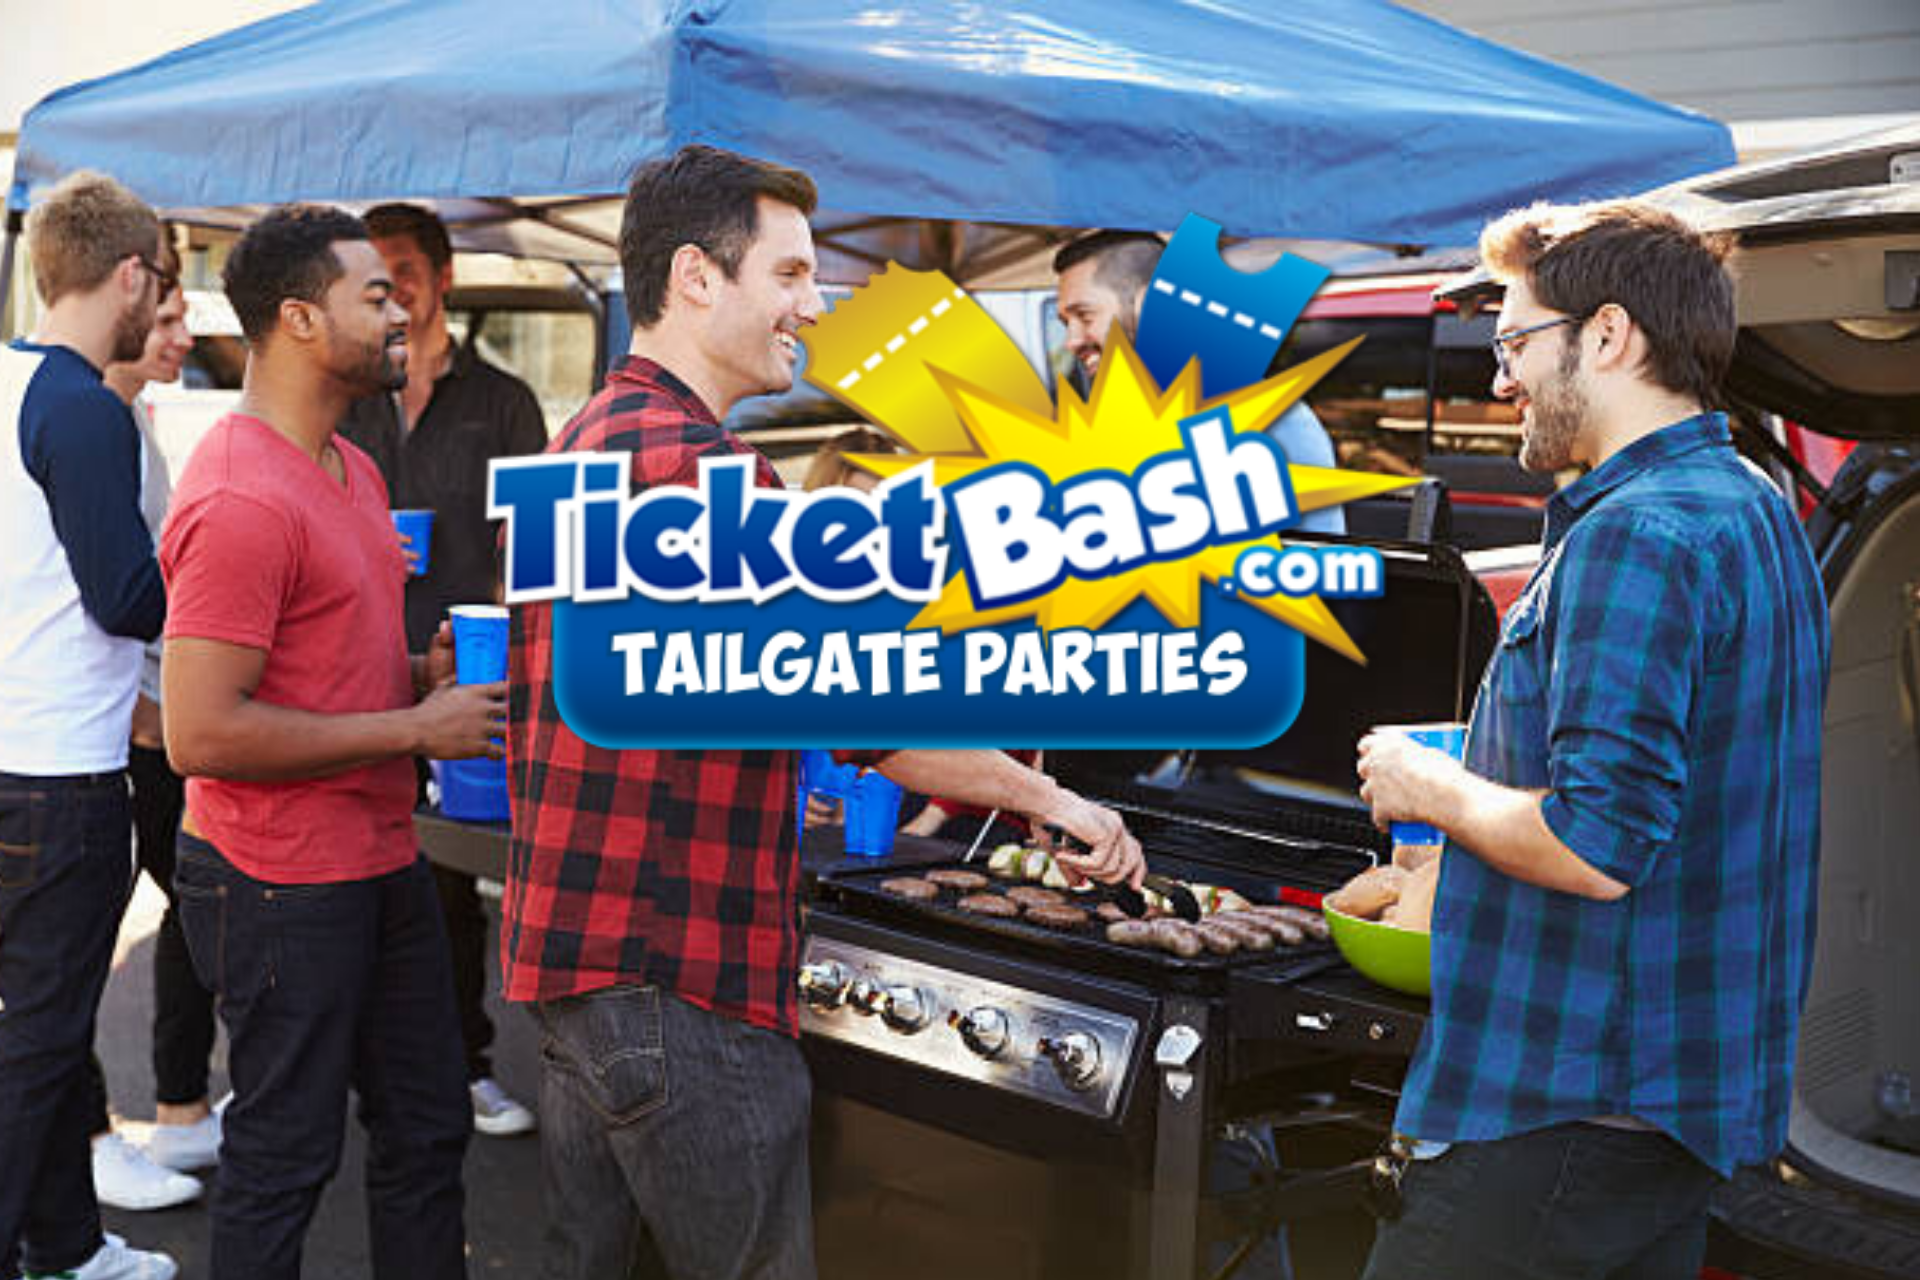 New York Yankees vs Boston Red Sox Tailgate Party 